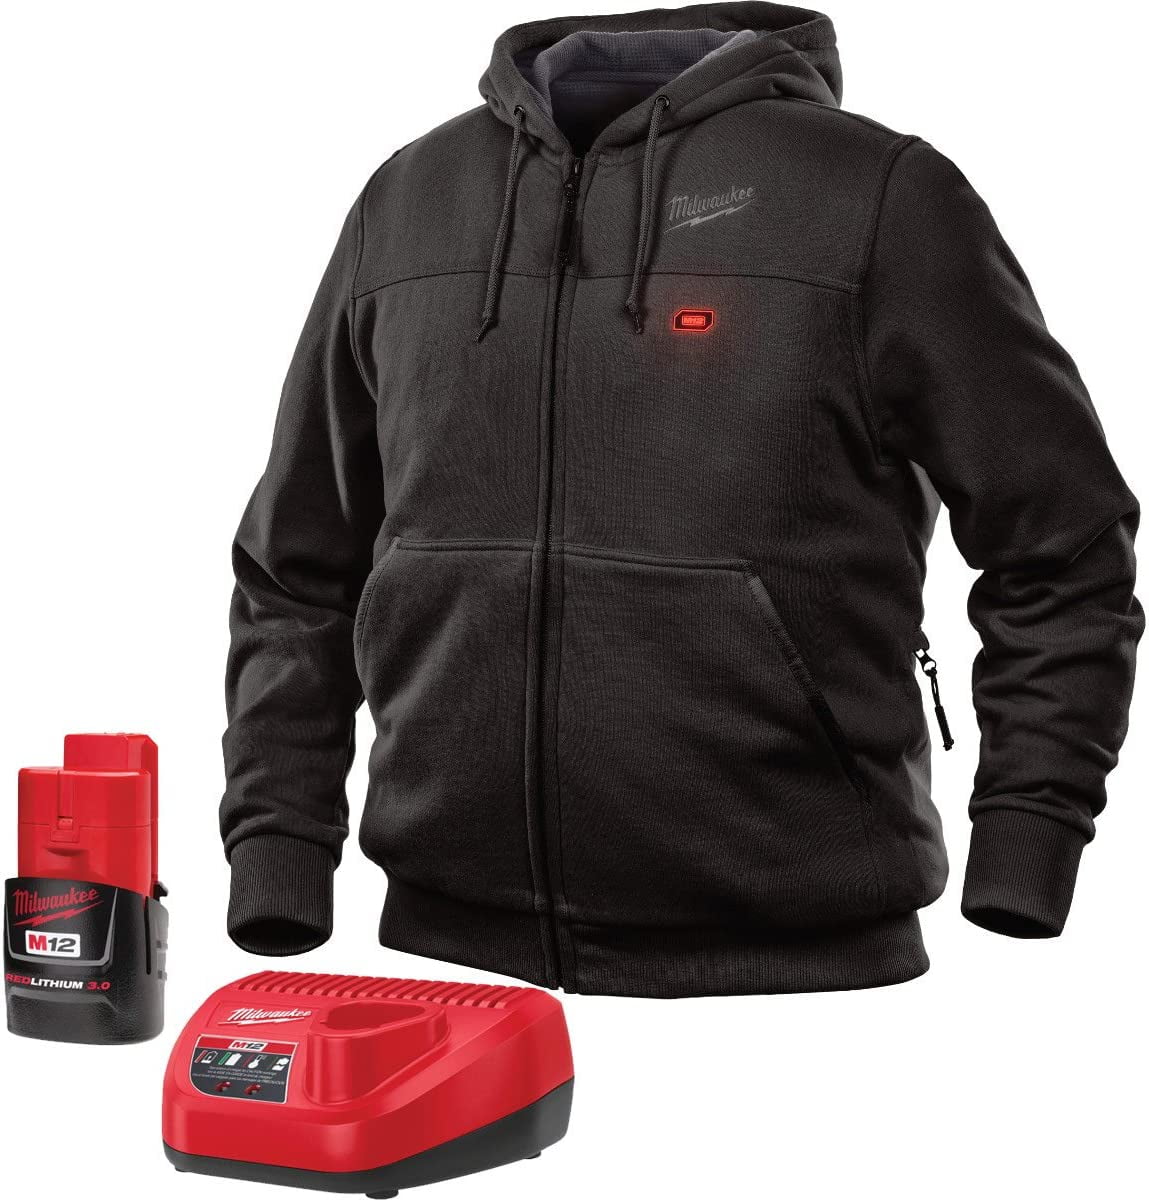 Milwaukee Hoodie KIT M12 12V Lithium-Ion Heated Front and Back Heat Zones  Battery and Charger Included (2X-Large, Black) 2X-Large Black